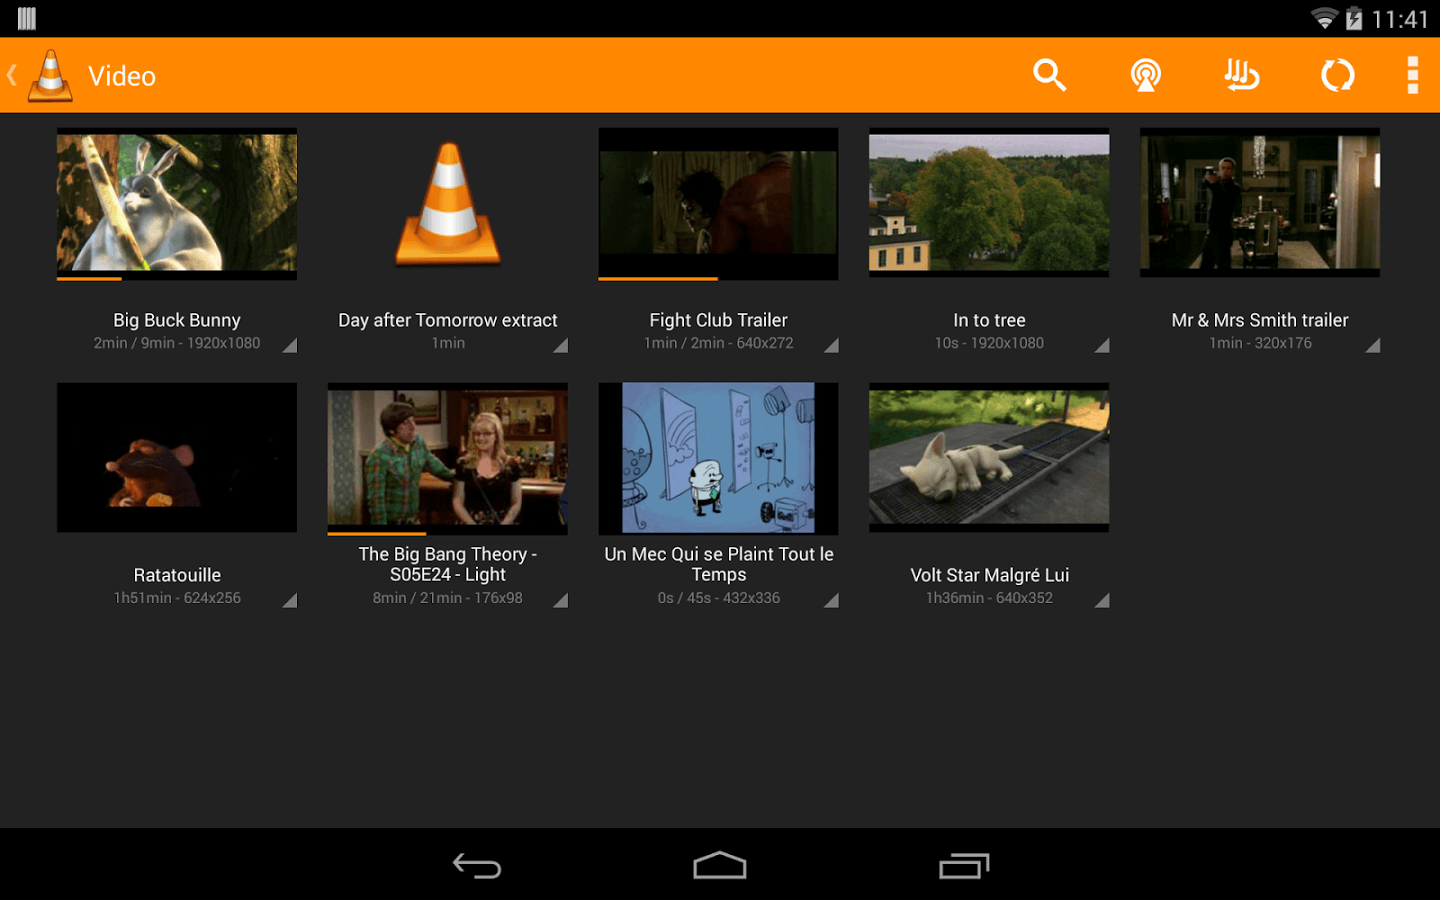 vlc media player players